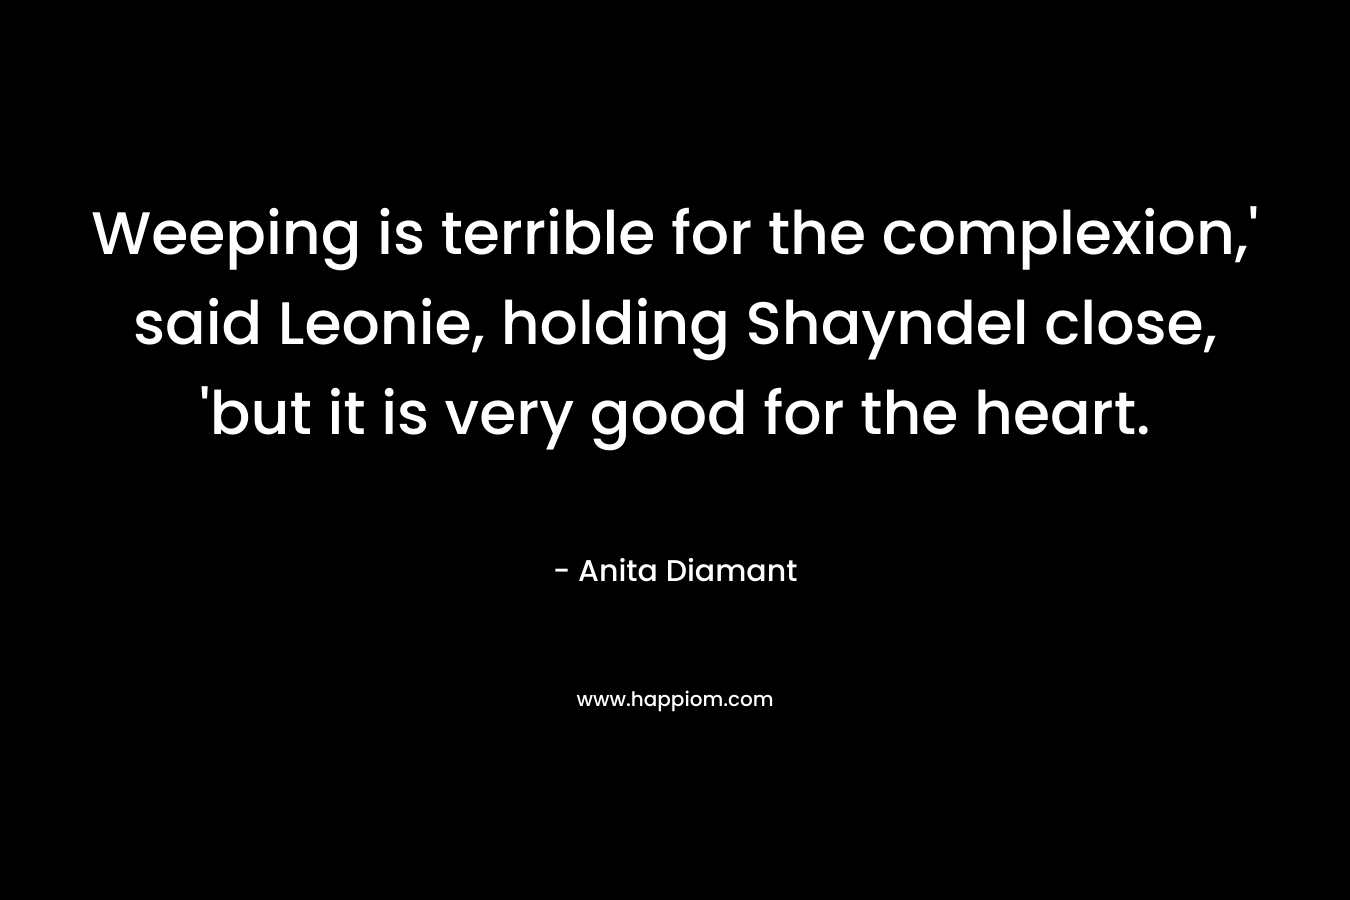 Weeping is terrible for the complexion,’ said Leonie, holding Shayndel close, ‘but it is very good for the heart. – Anita Diamant